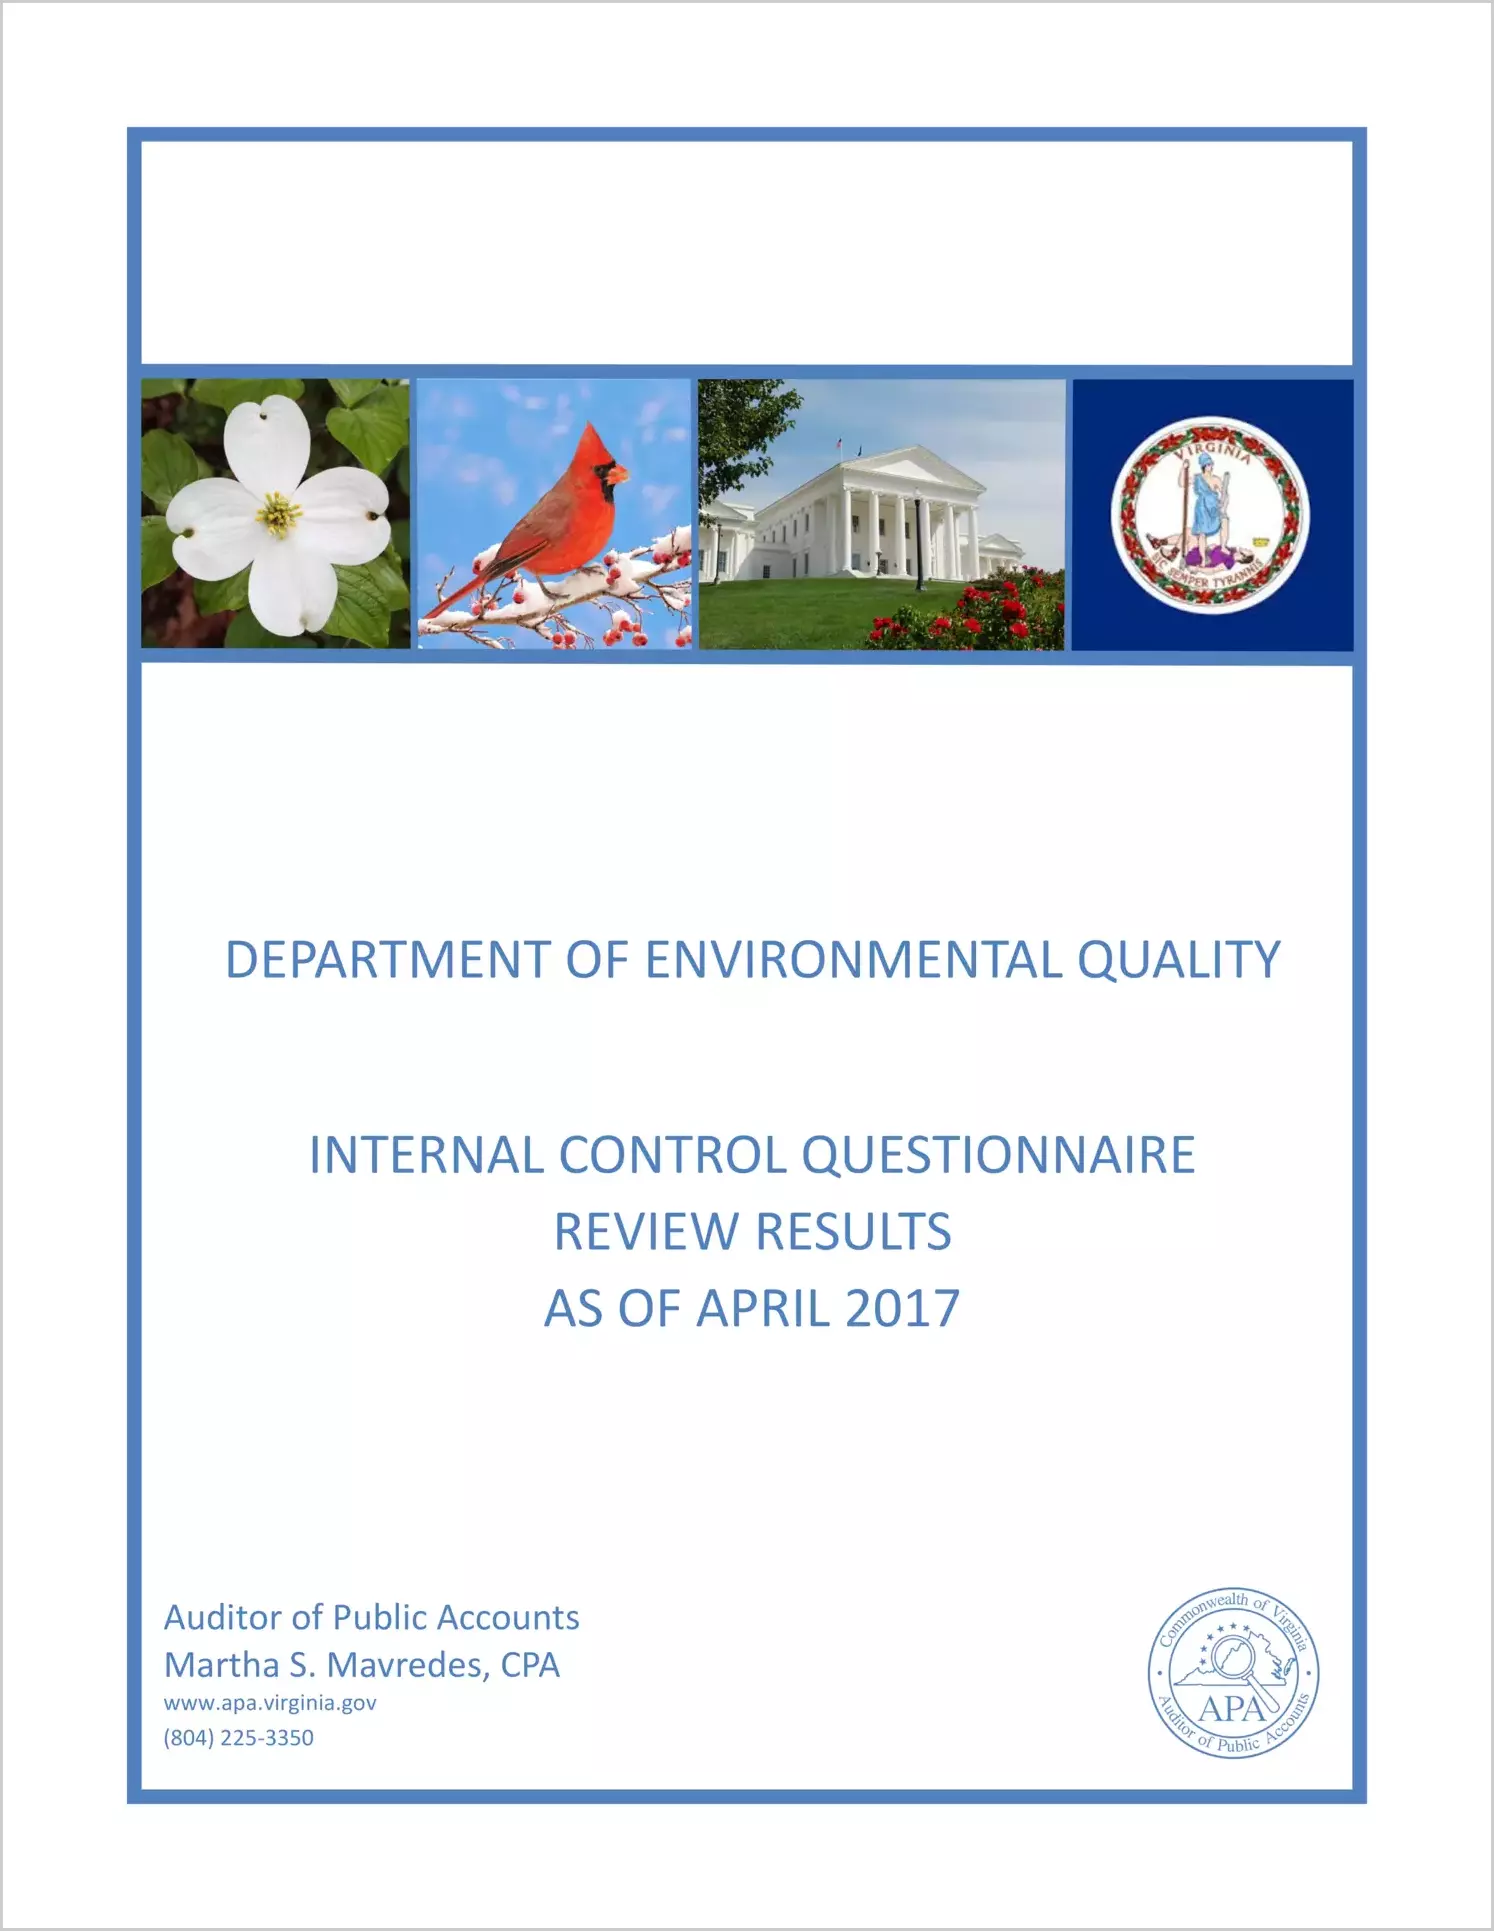 Department of Environmental Quality Internal Control Questionnaire Review Results as of April 2017